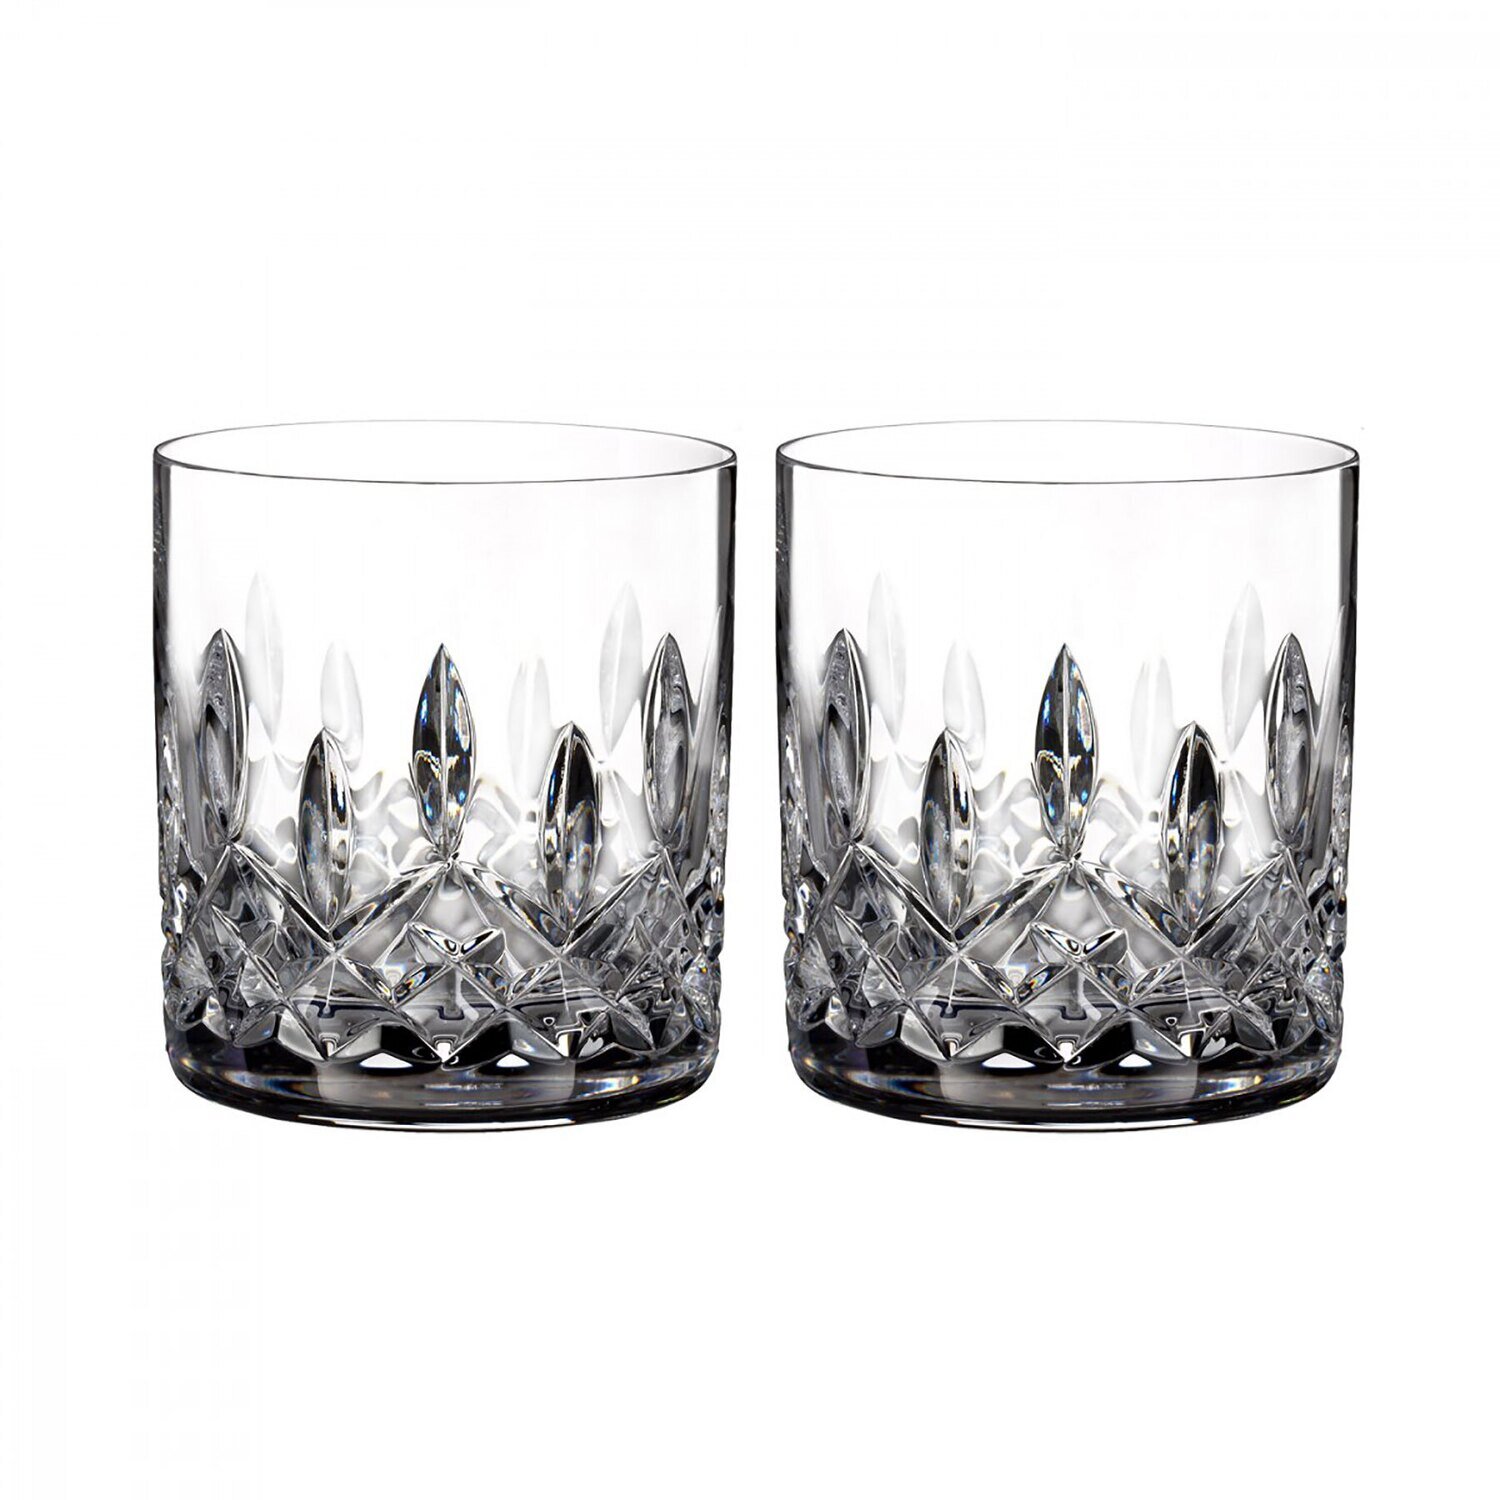 Waterford Lismore Connoisseur Straight Sided Tumbler 7 Oz Set of 2 40003430